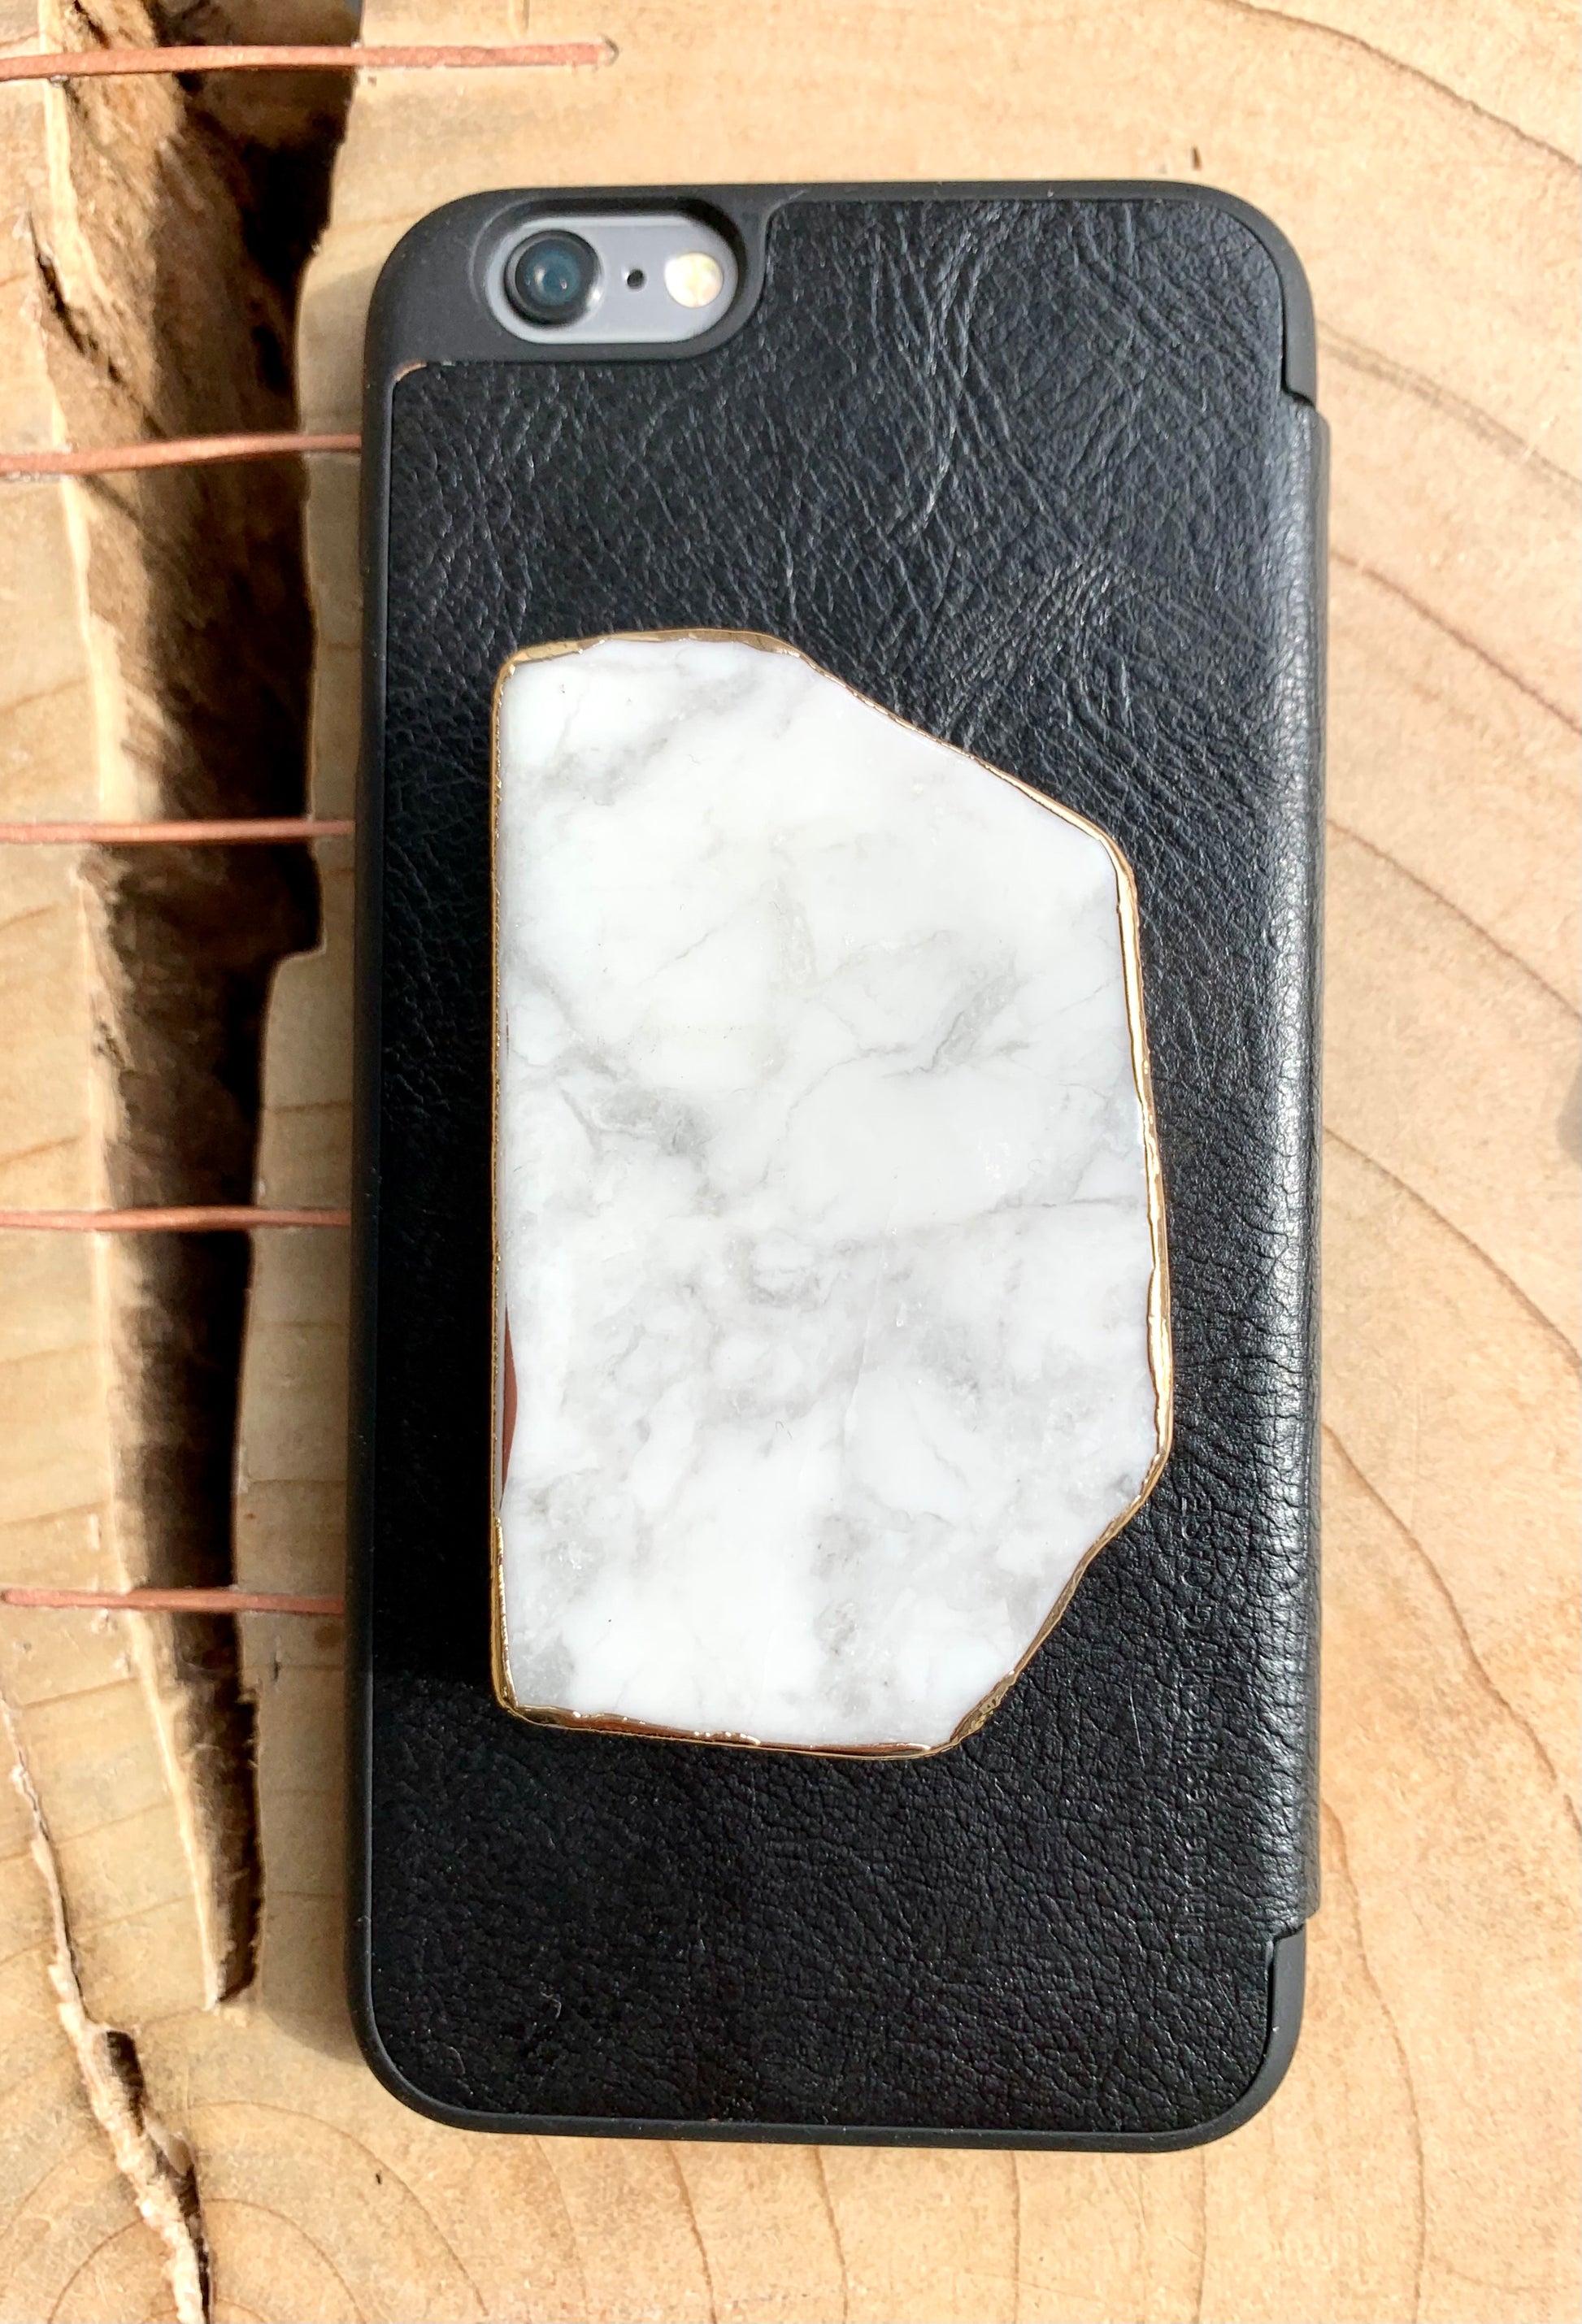 White Howlite Crystal Phone Grip - CrystalBoutique.co.uk